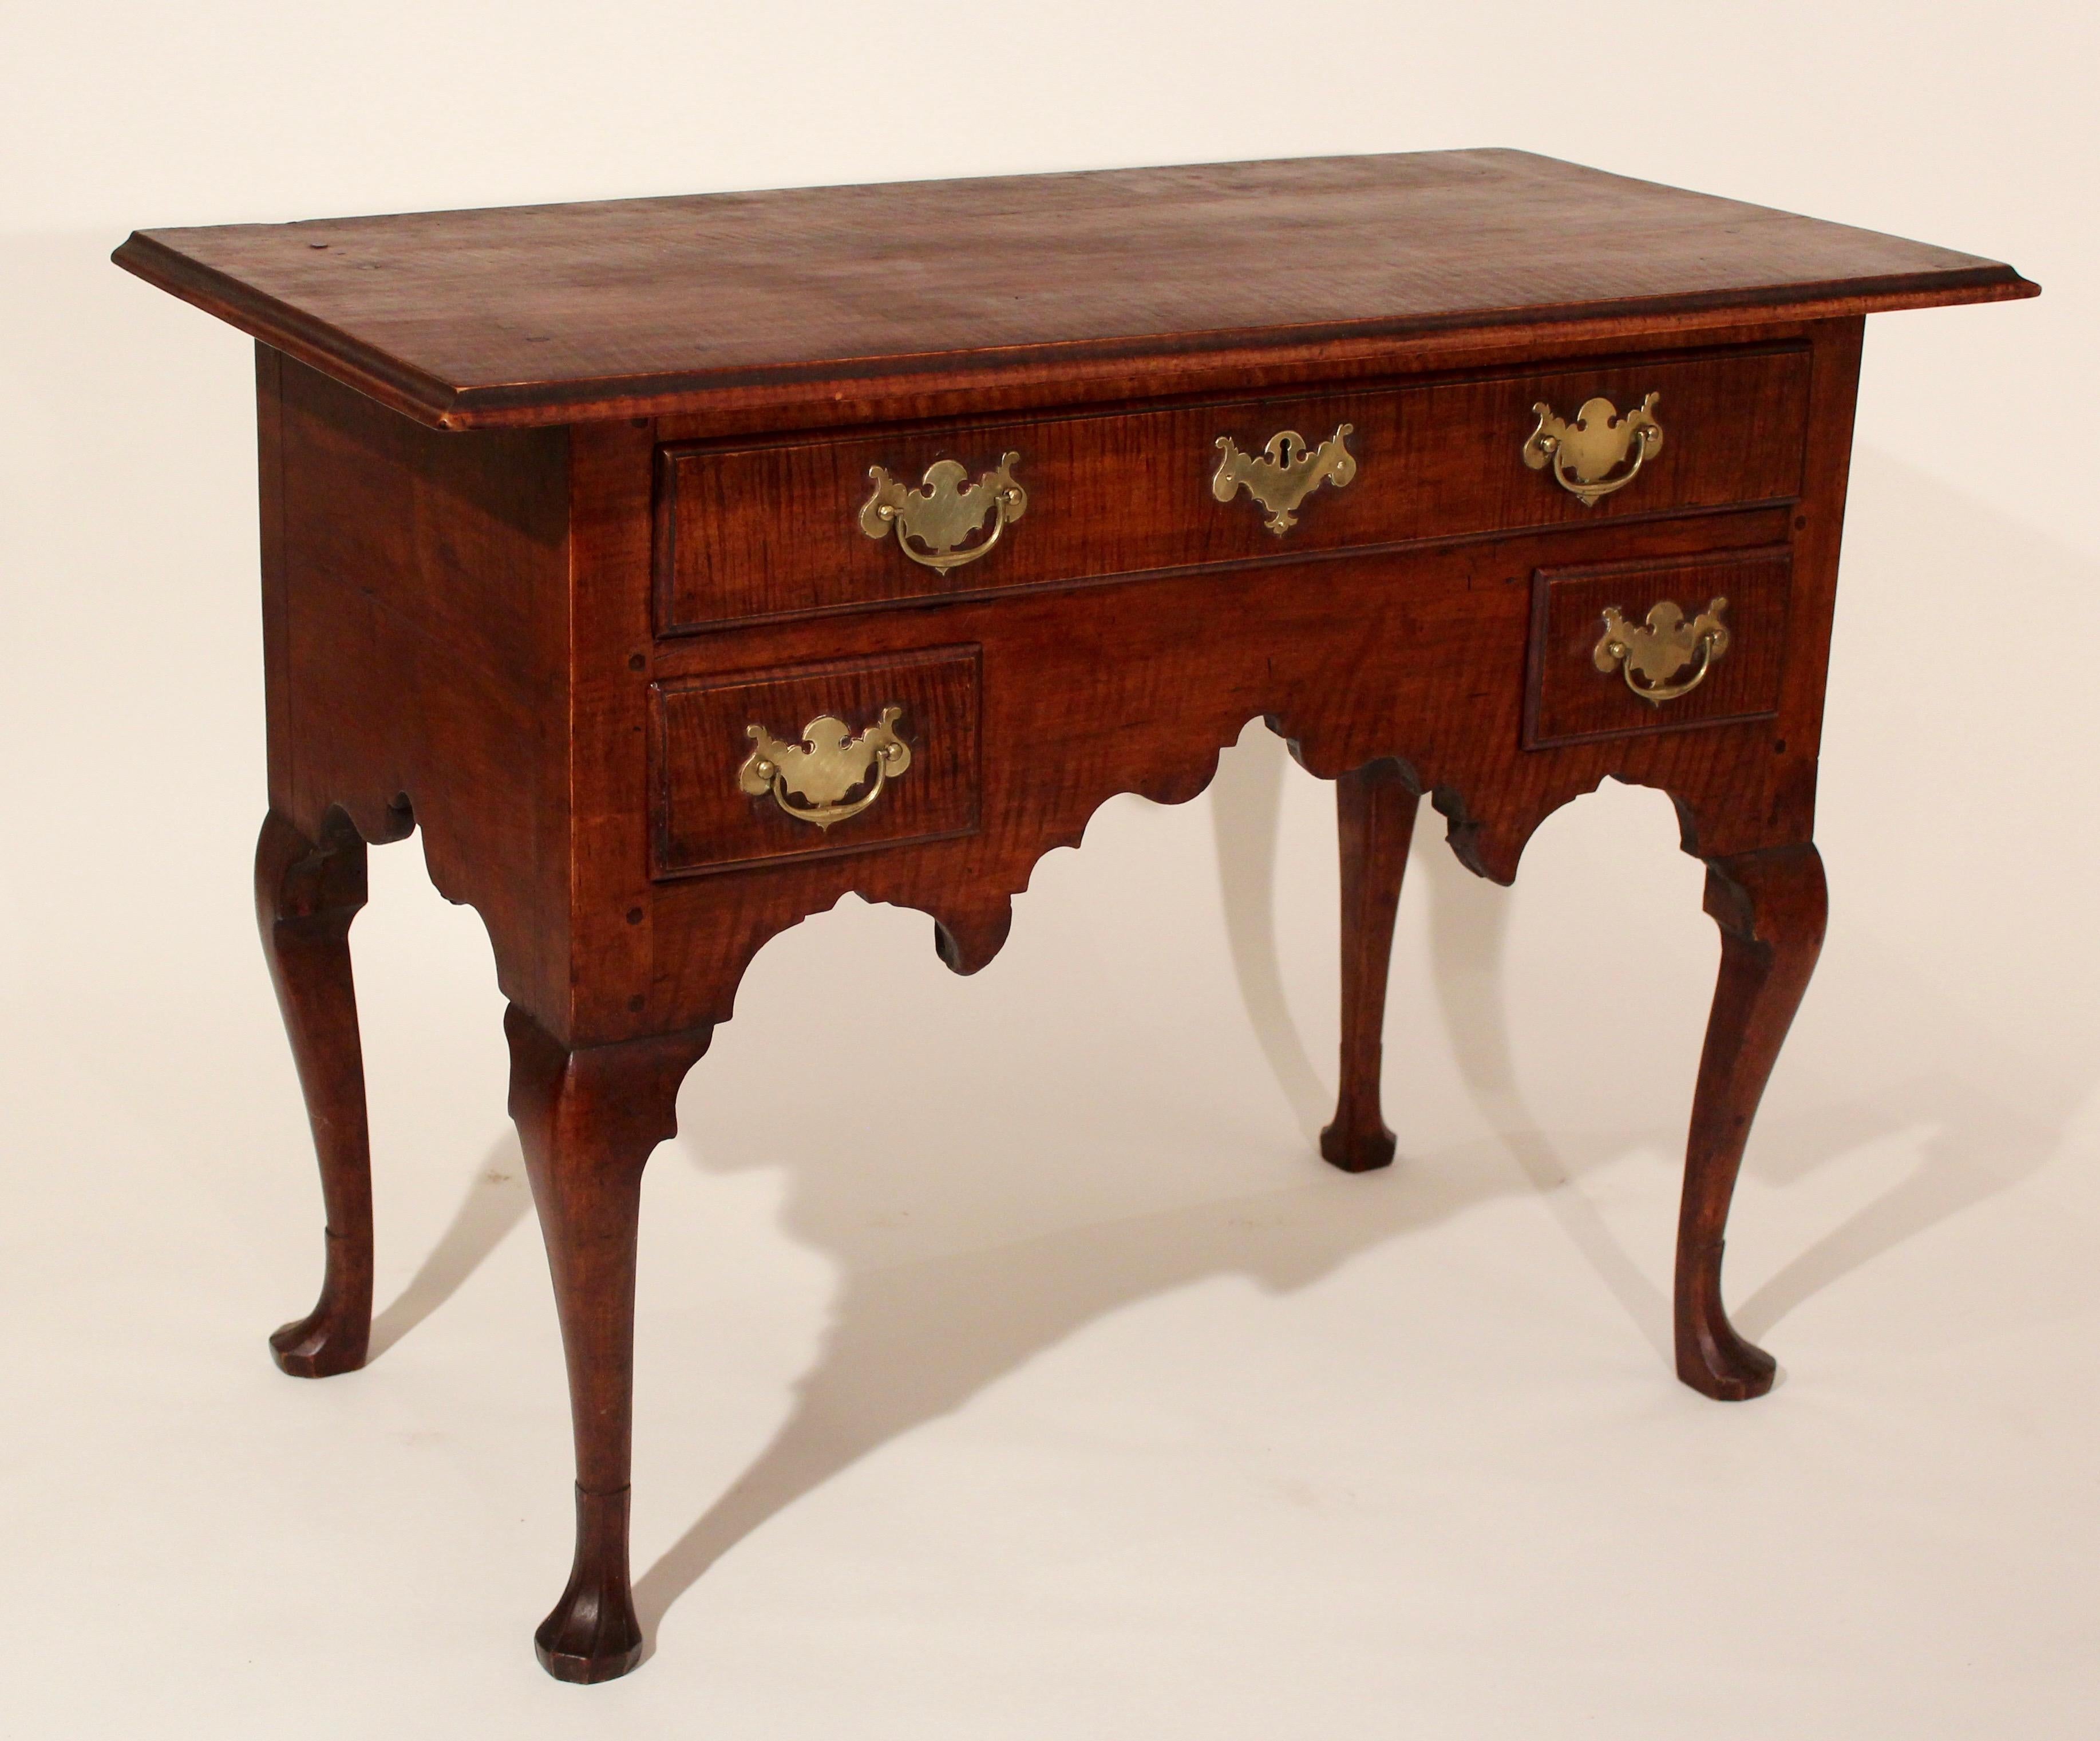 18th century Philadelphia tiger maple Queen Anne dressing table with nicely scalloped base one drawer over two configuration still retaining its original plate brasses, Cabriole legs terminating in faceted foot.